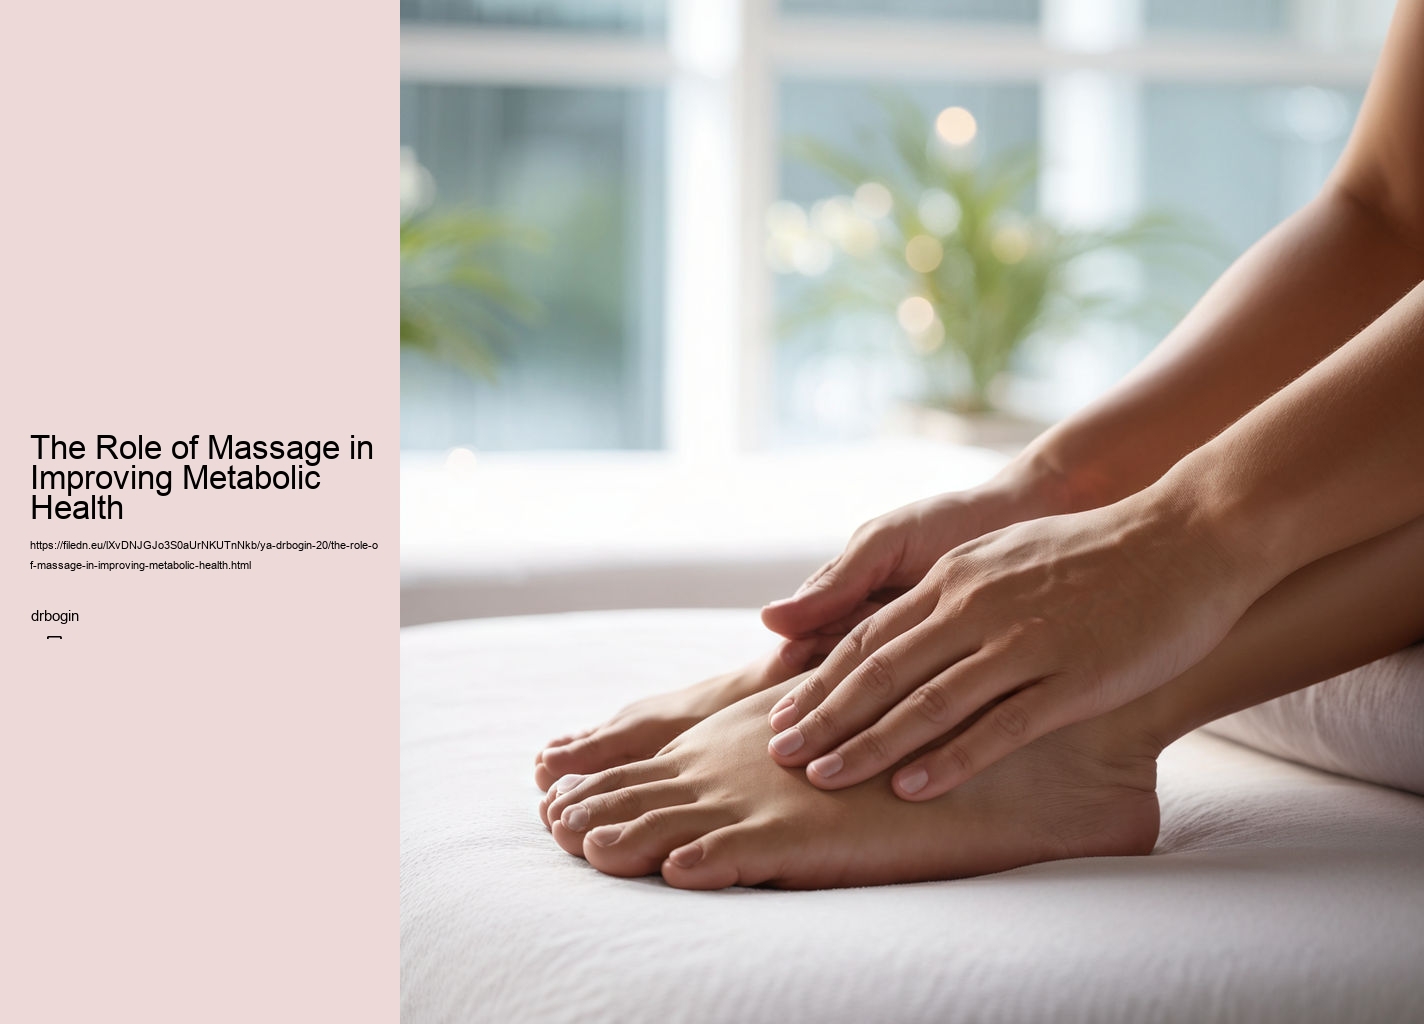 The Role of Massage in Improving Metabolic Health